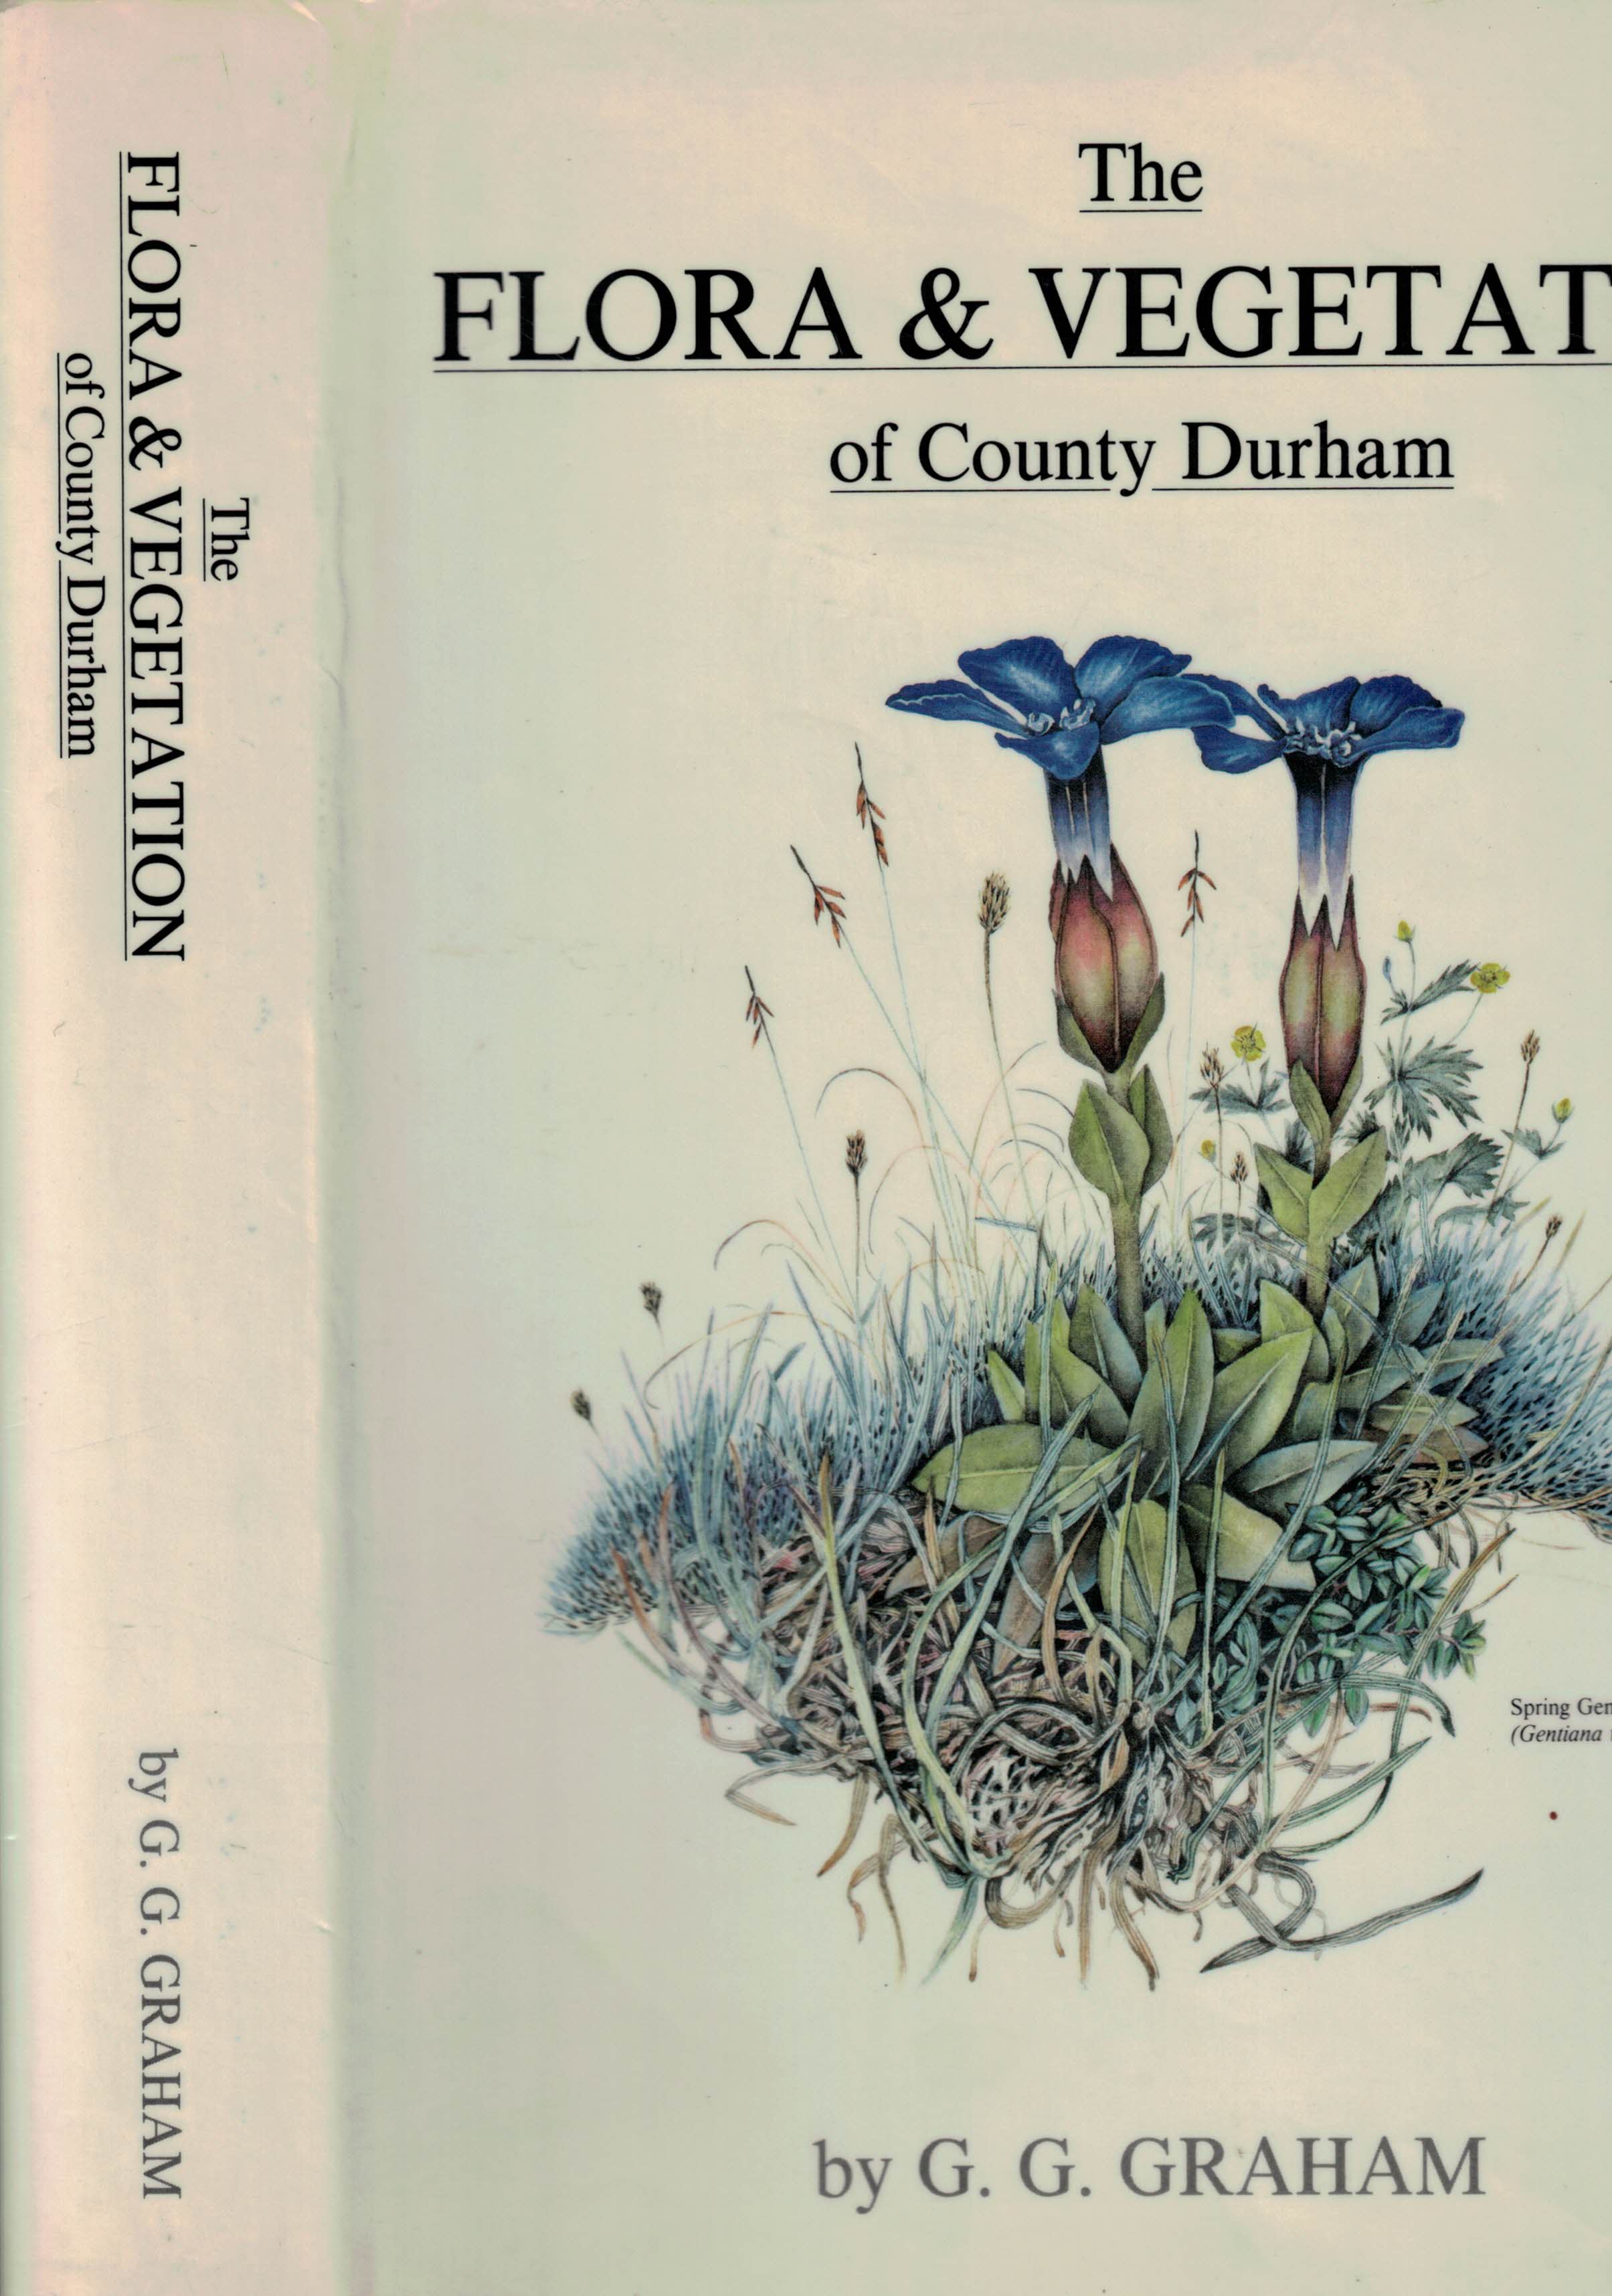 The Flora and Vegetation of County Durham. Signed copy.